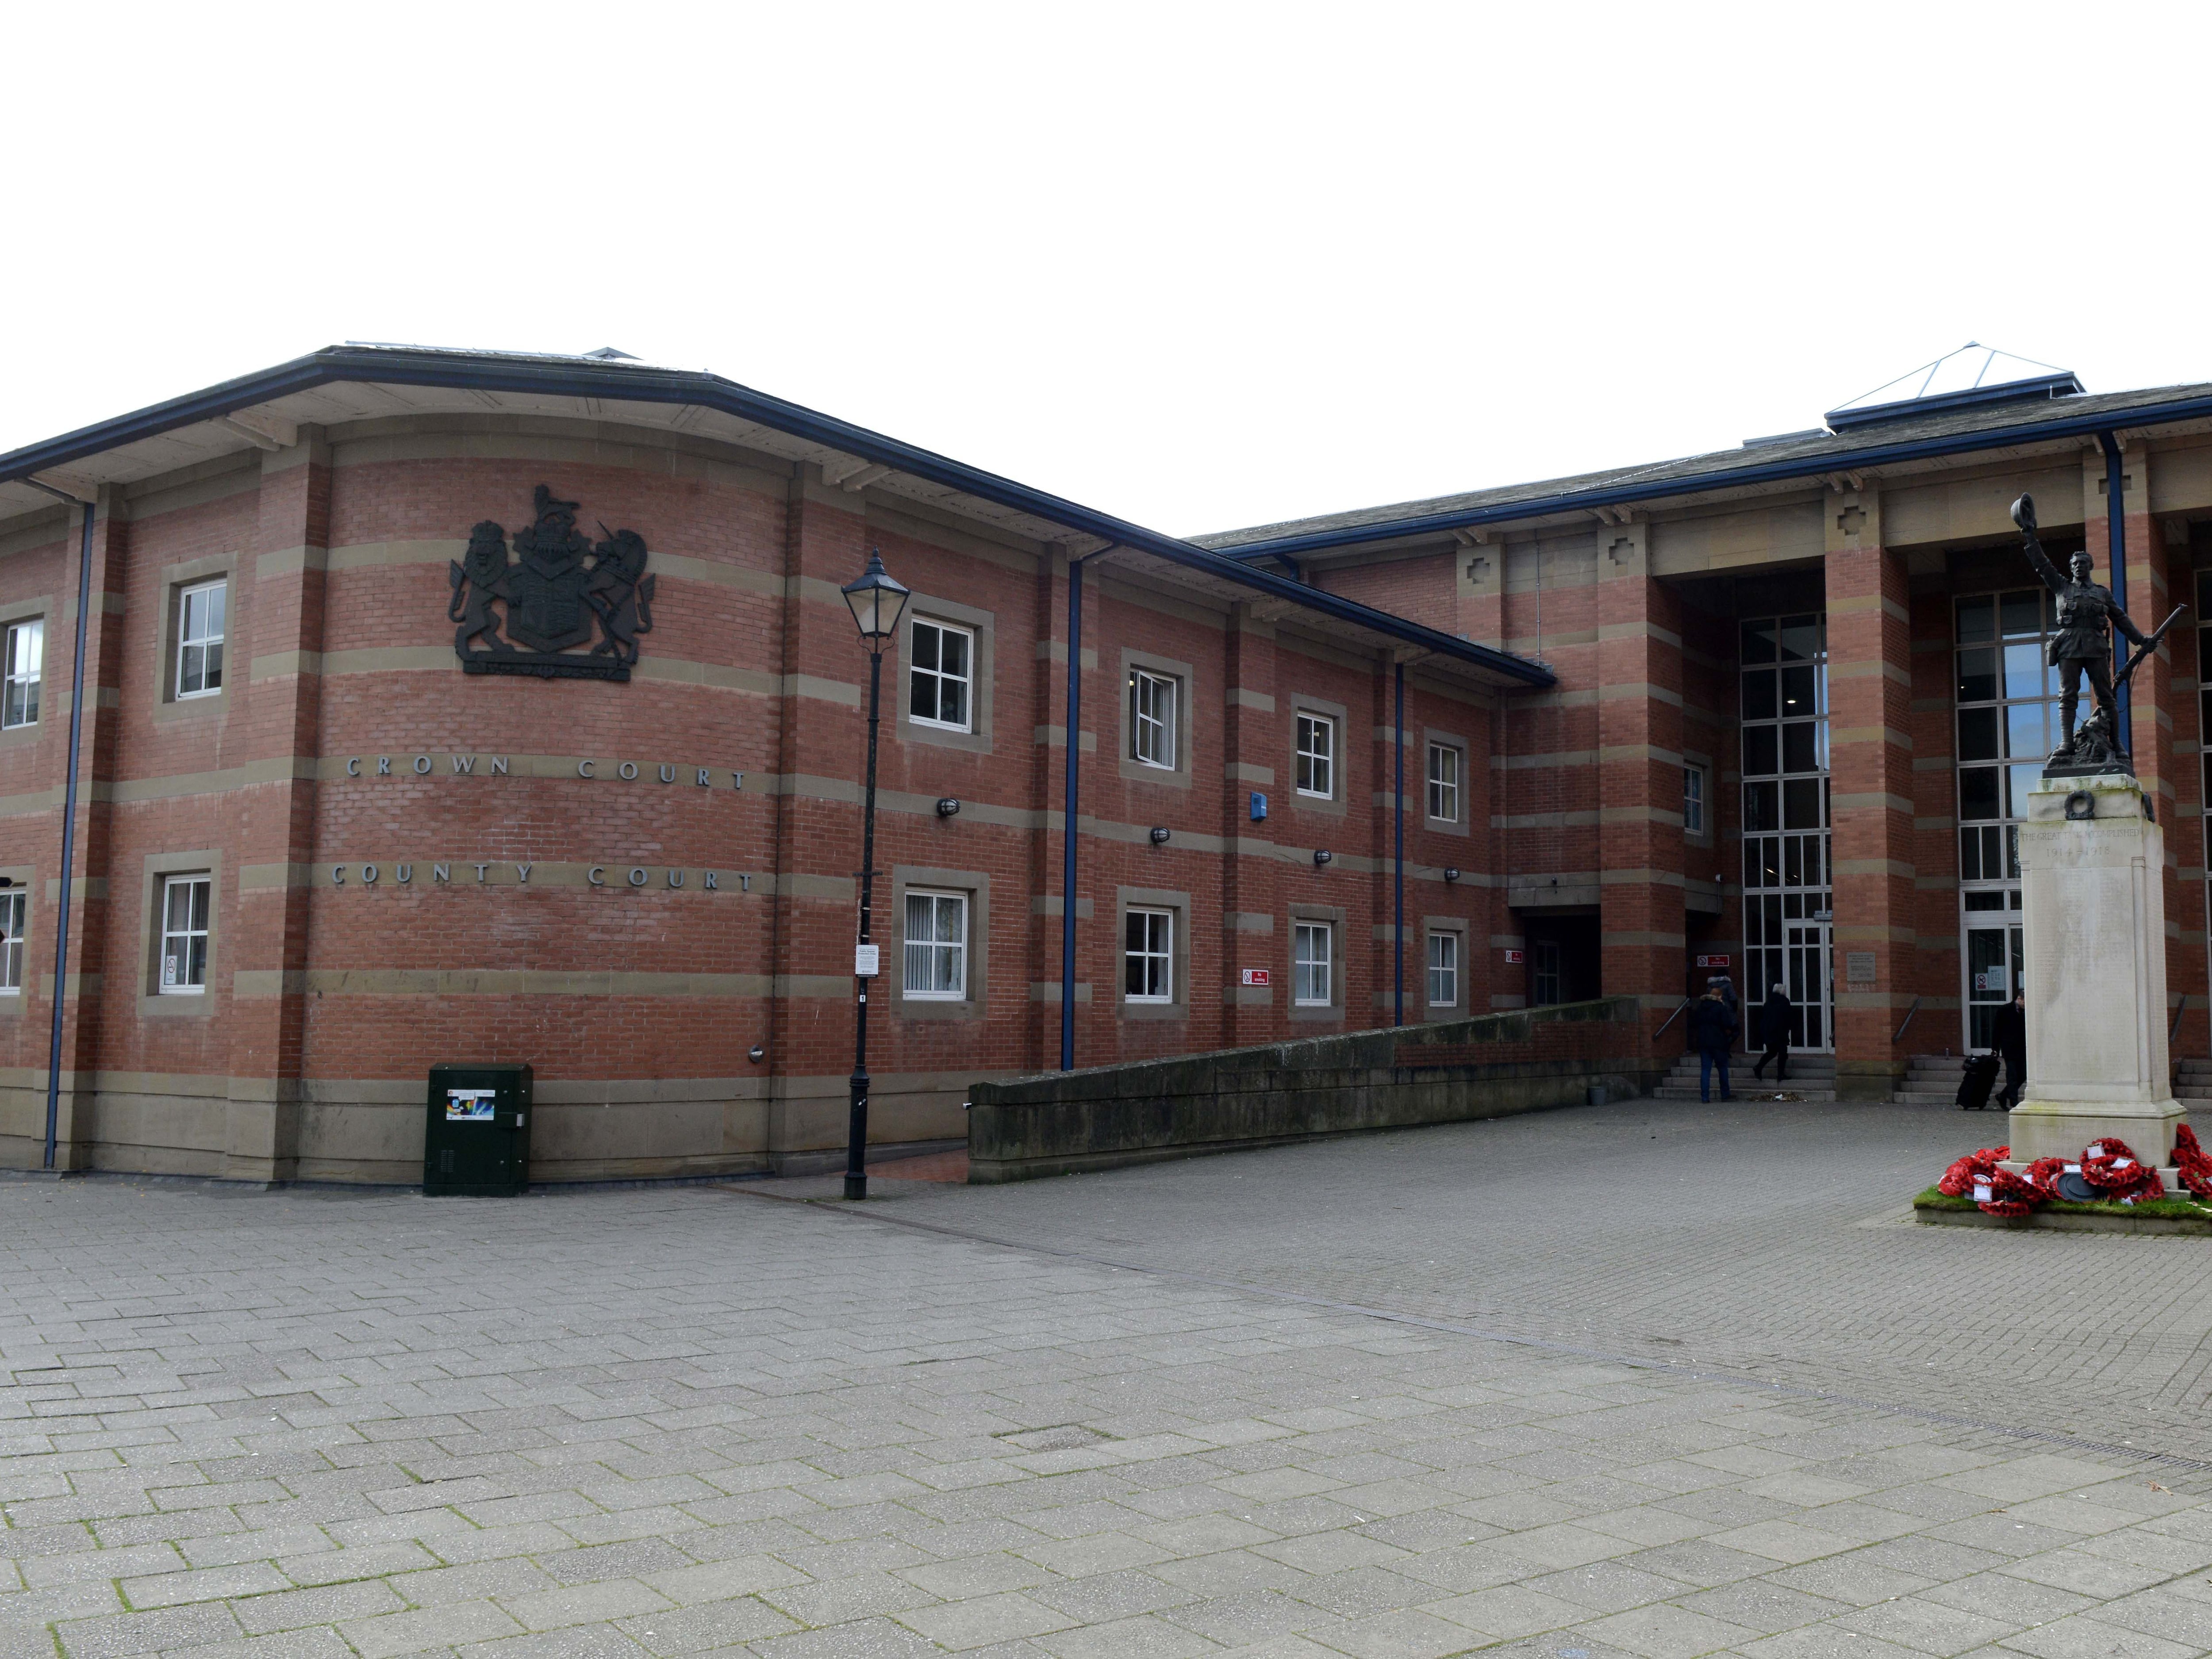 Bad blood over dog incident in Featherstone led to strangulation attempt – court